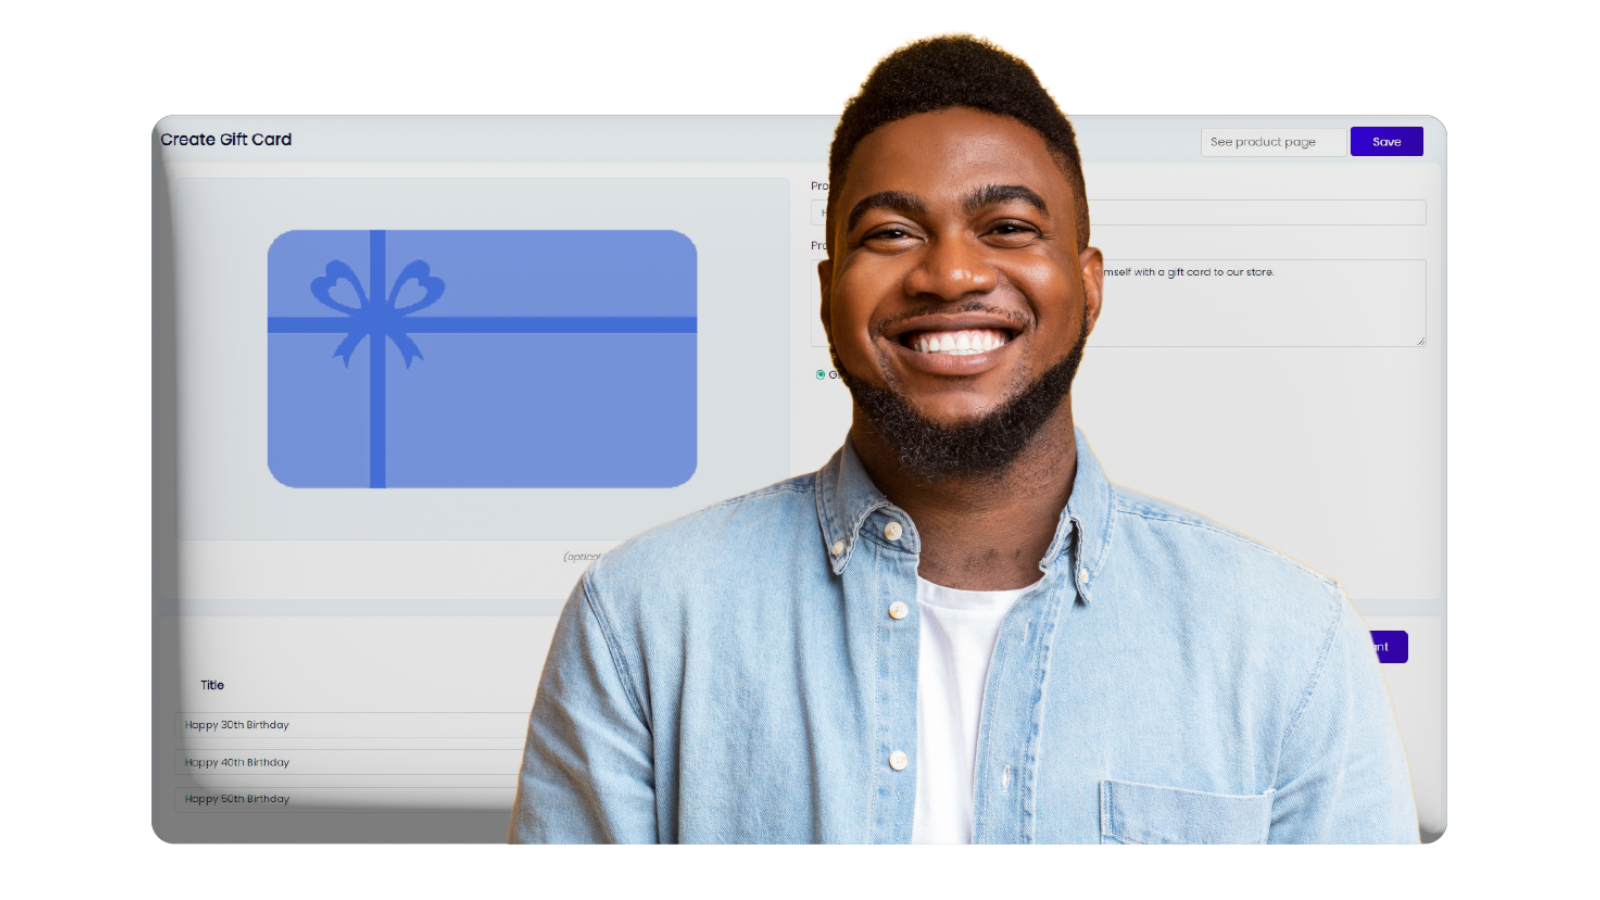 Easily create and customize your gift cards